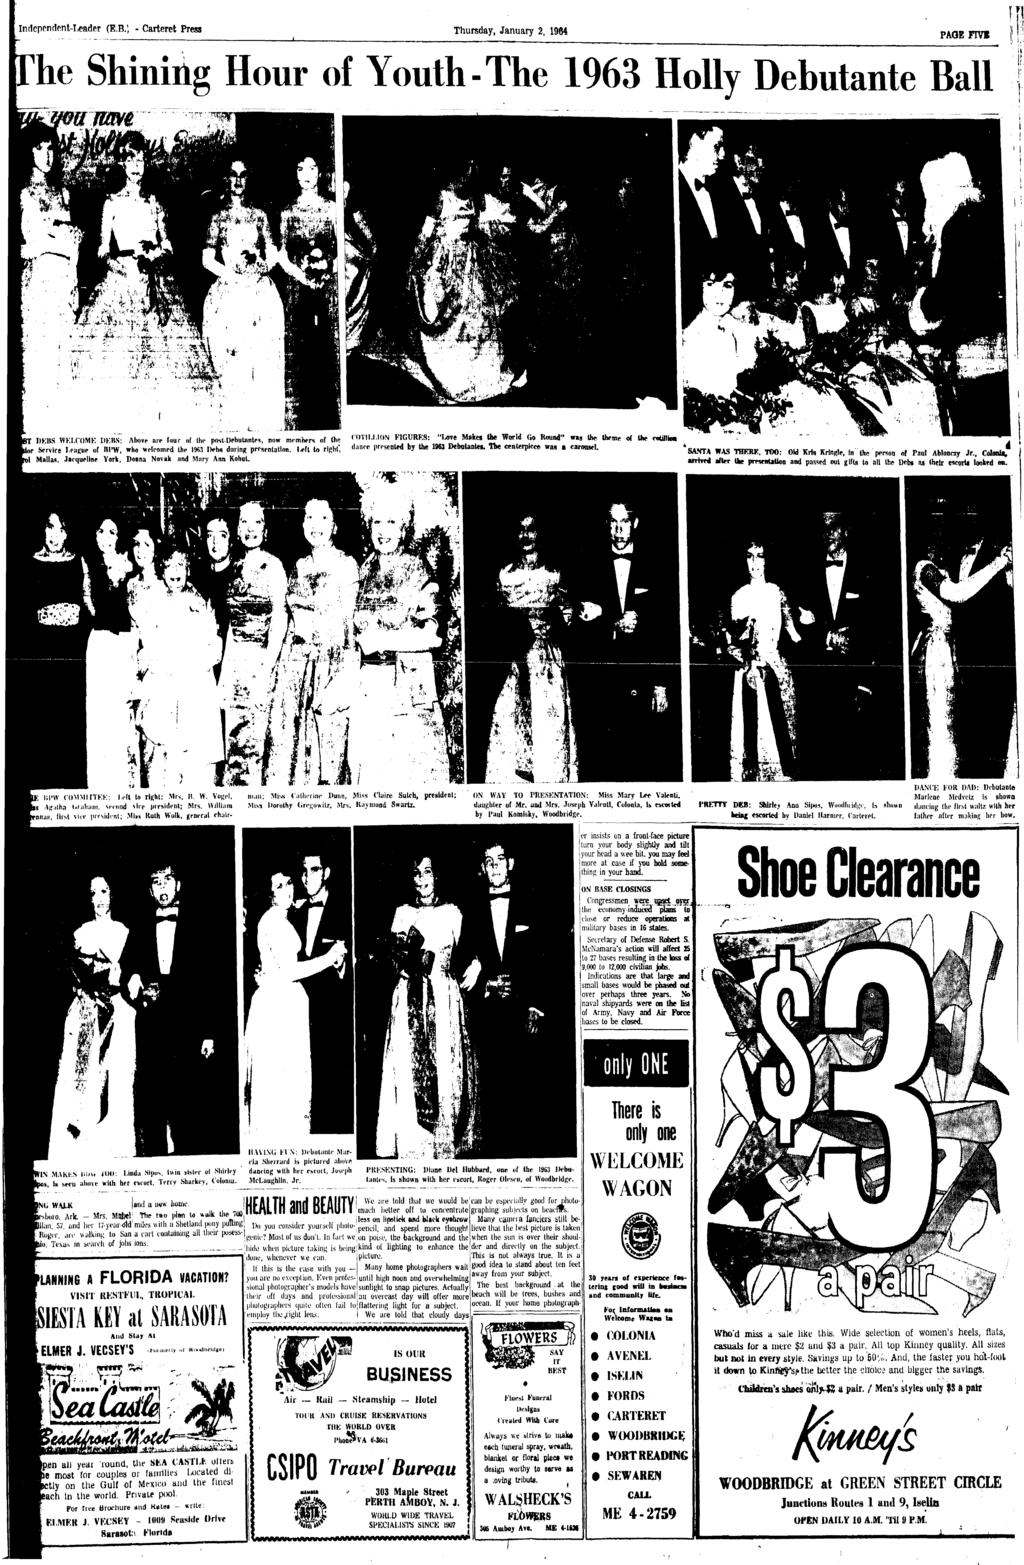 ndependent-leader (E.B.; - Carteret Press Thursday, January 2, 1964 PAGE FVS he Shnng Hour of Youth-The 1963 Holly Debutante Ball mamm s** 1!